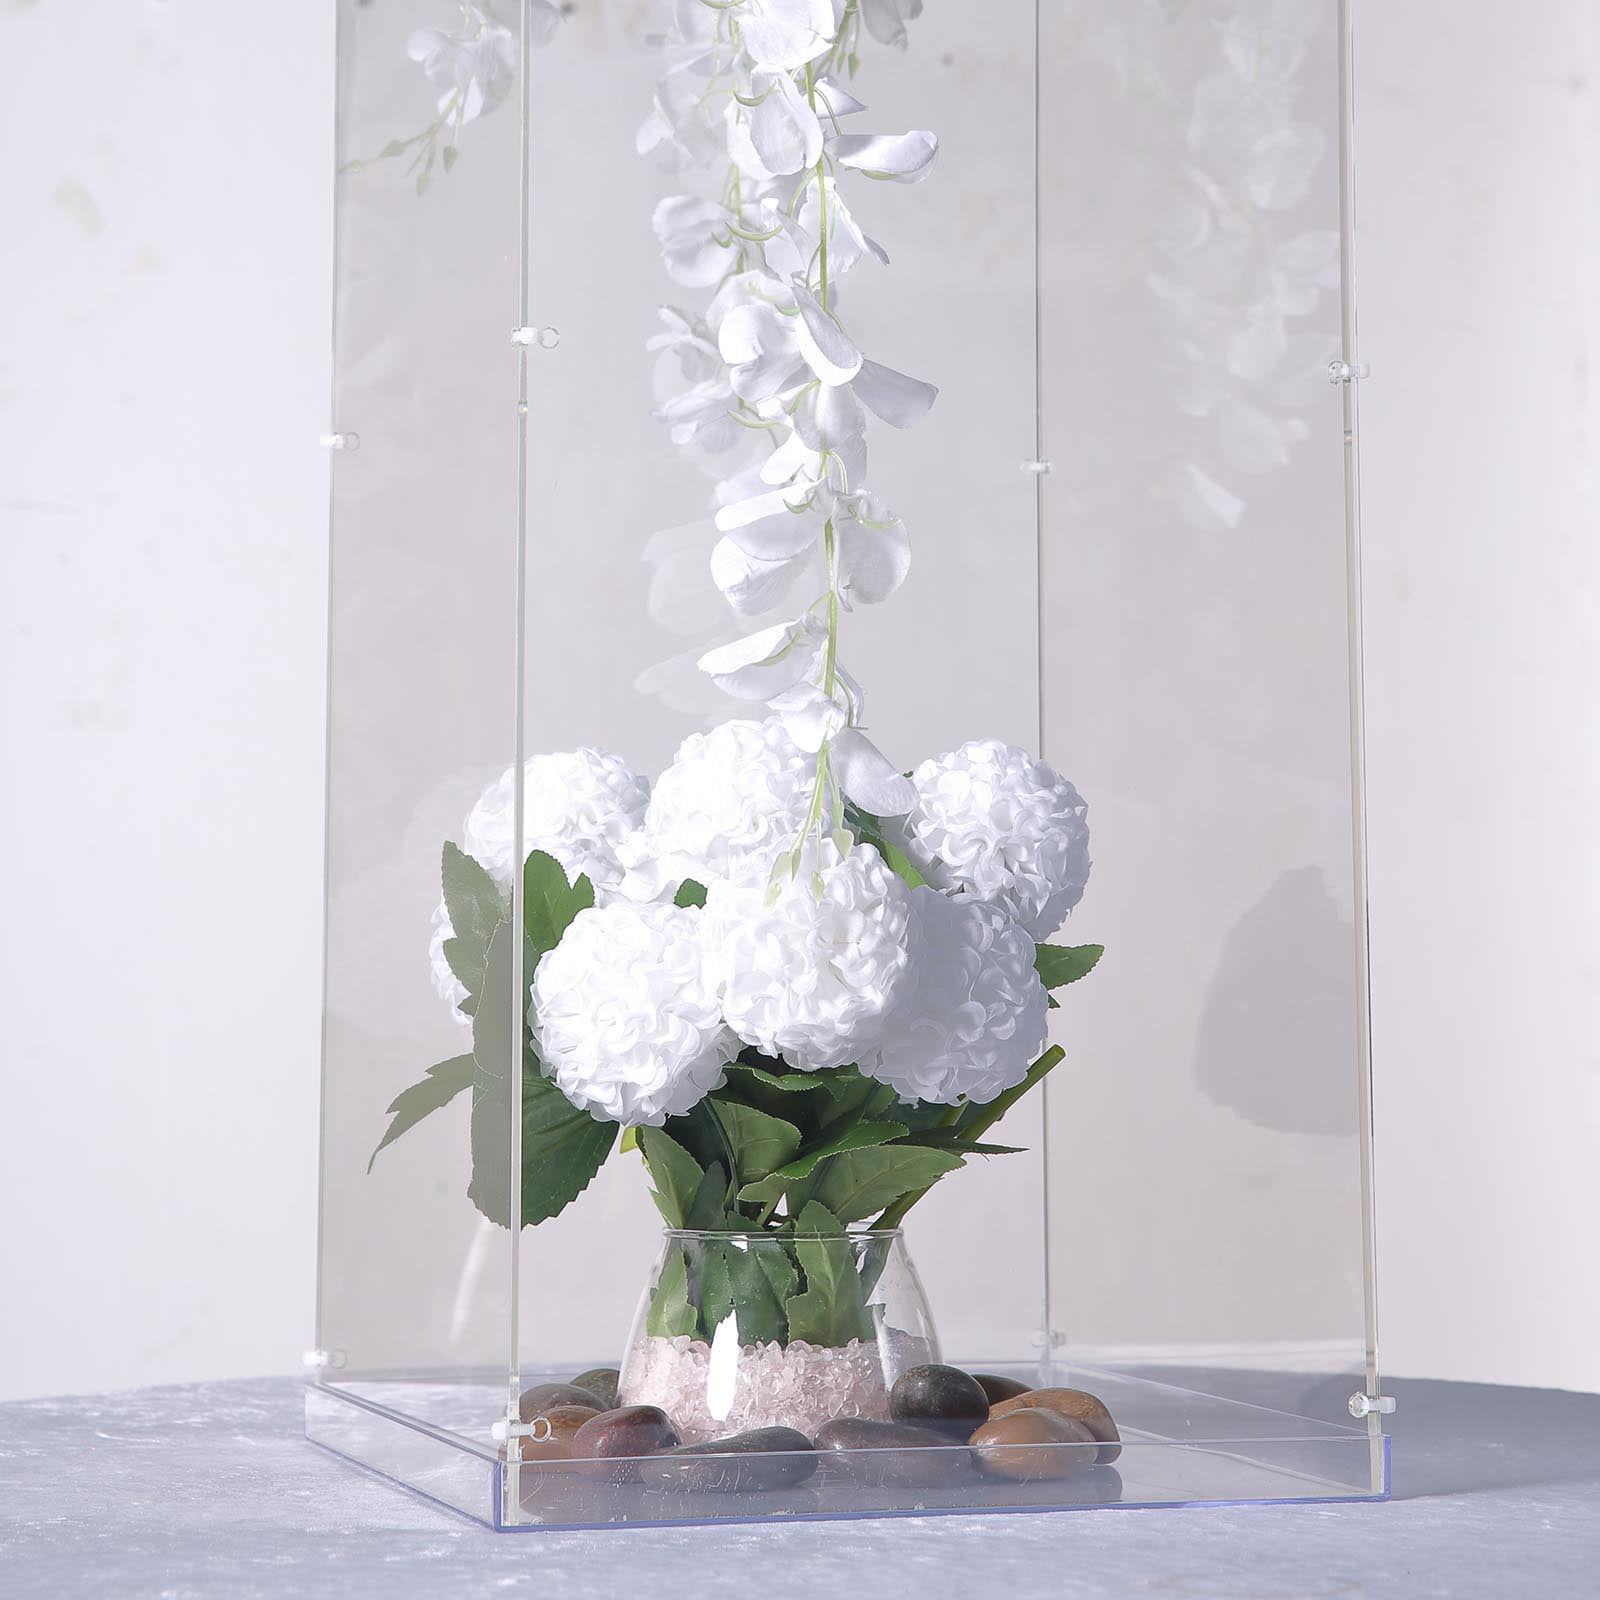 BalsaCircle 2 pcs 8-Inch Tall Clear Glass Teardrop Centerpiece Vases Wedding Reception Home Party Events Decorations 